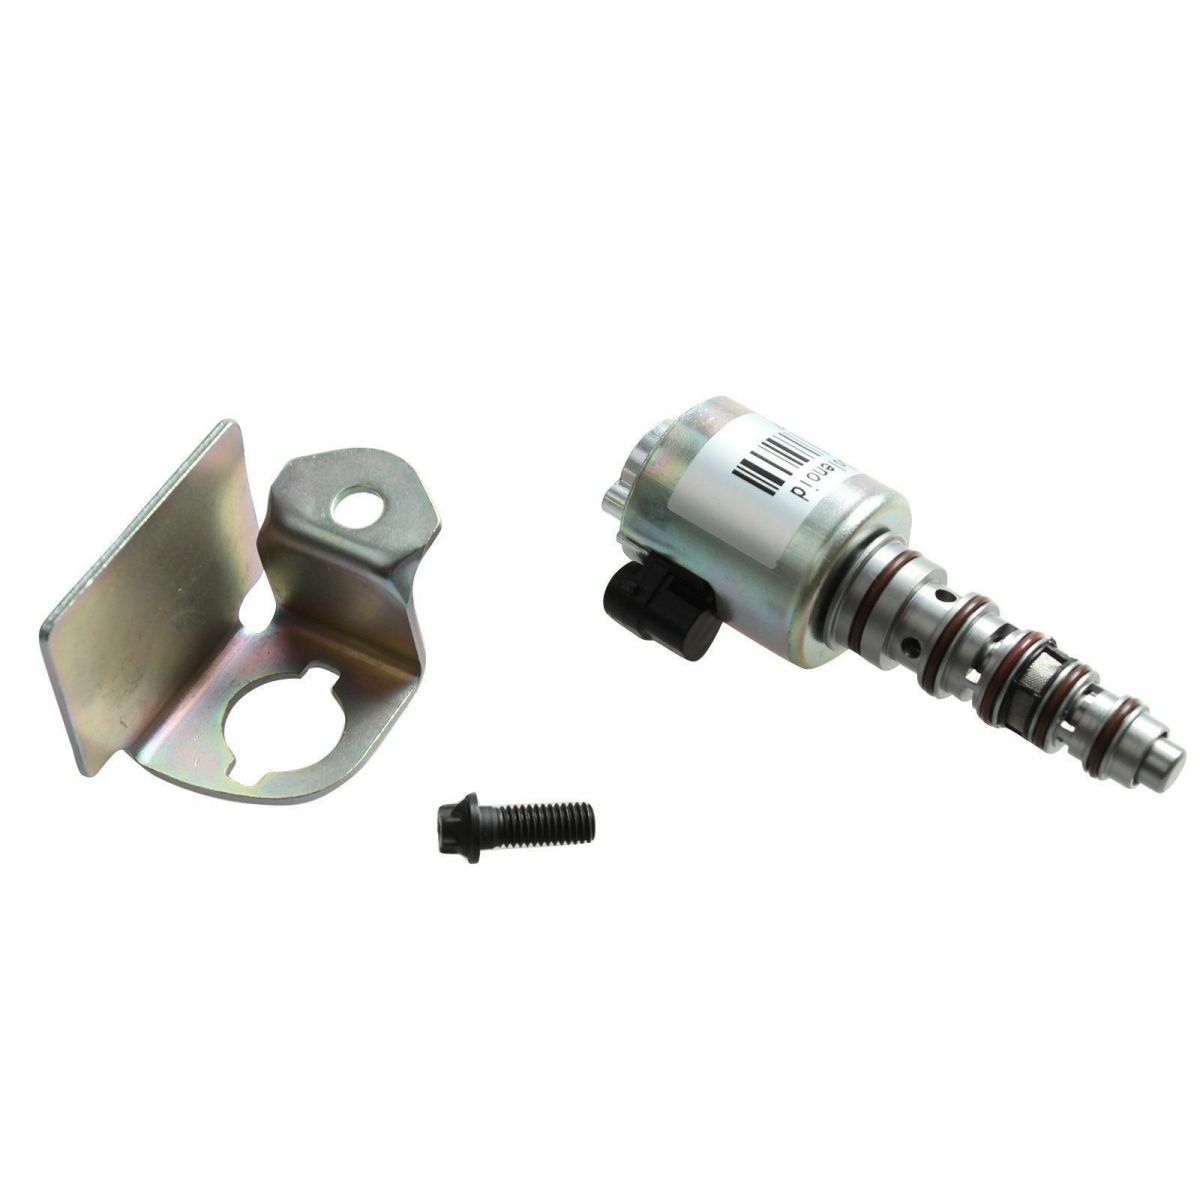 Rudy's Performance Parts - Rudy's Turbocharger VGT Solenoid Actuator For 04.5-16 6.6 Duramax / 03-10 6.0 Powerstroke